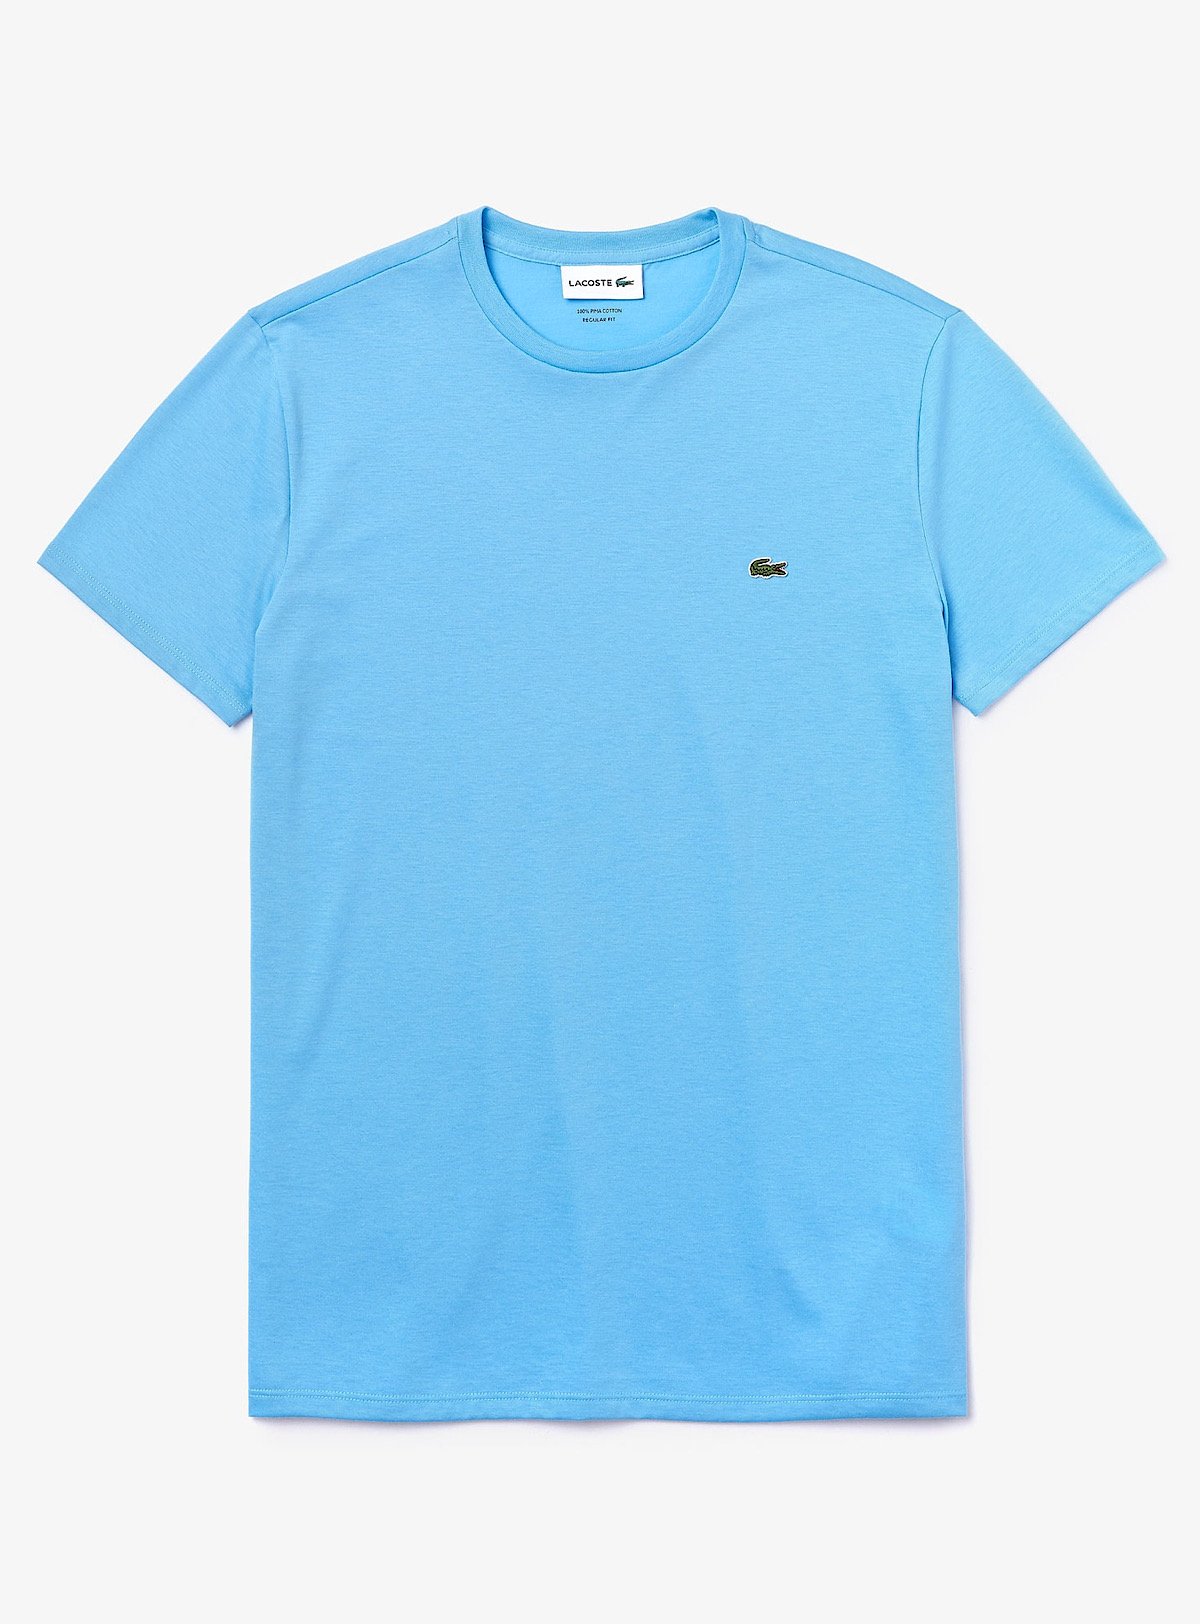 Lacoste T-Shirt - Crew - Baby Blue 709 